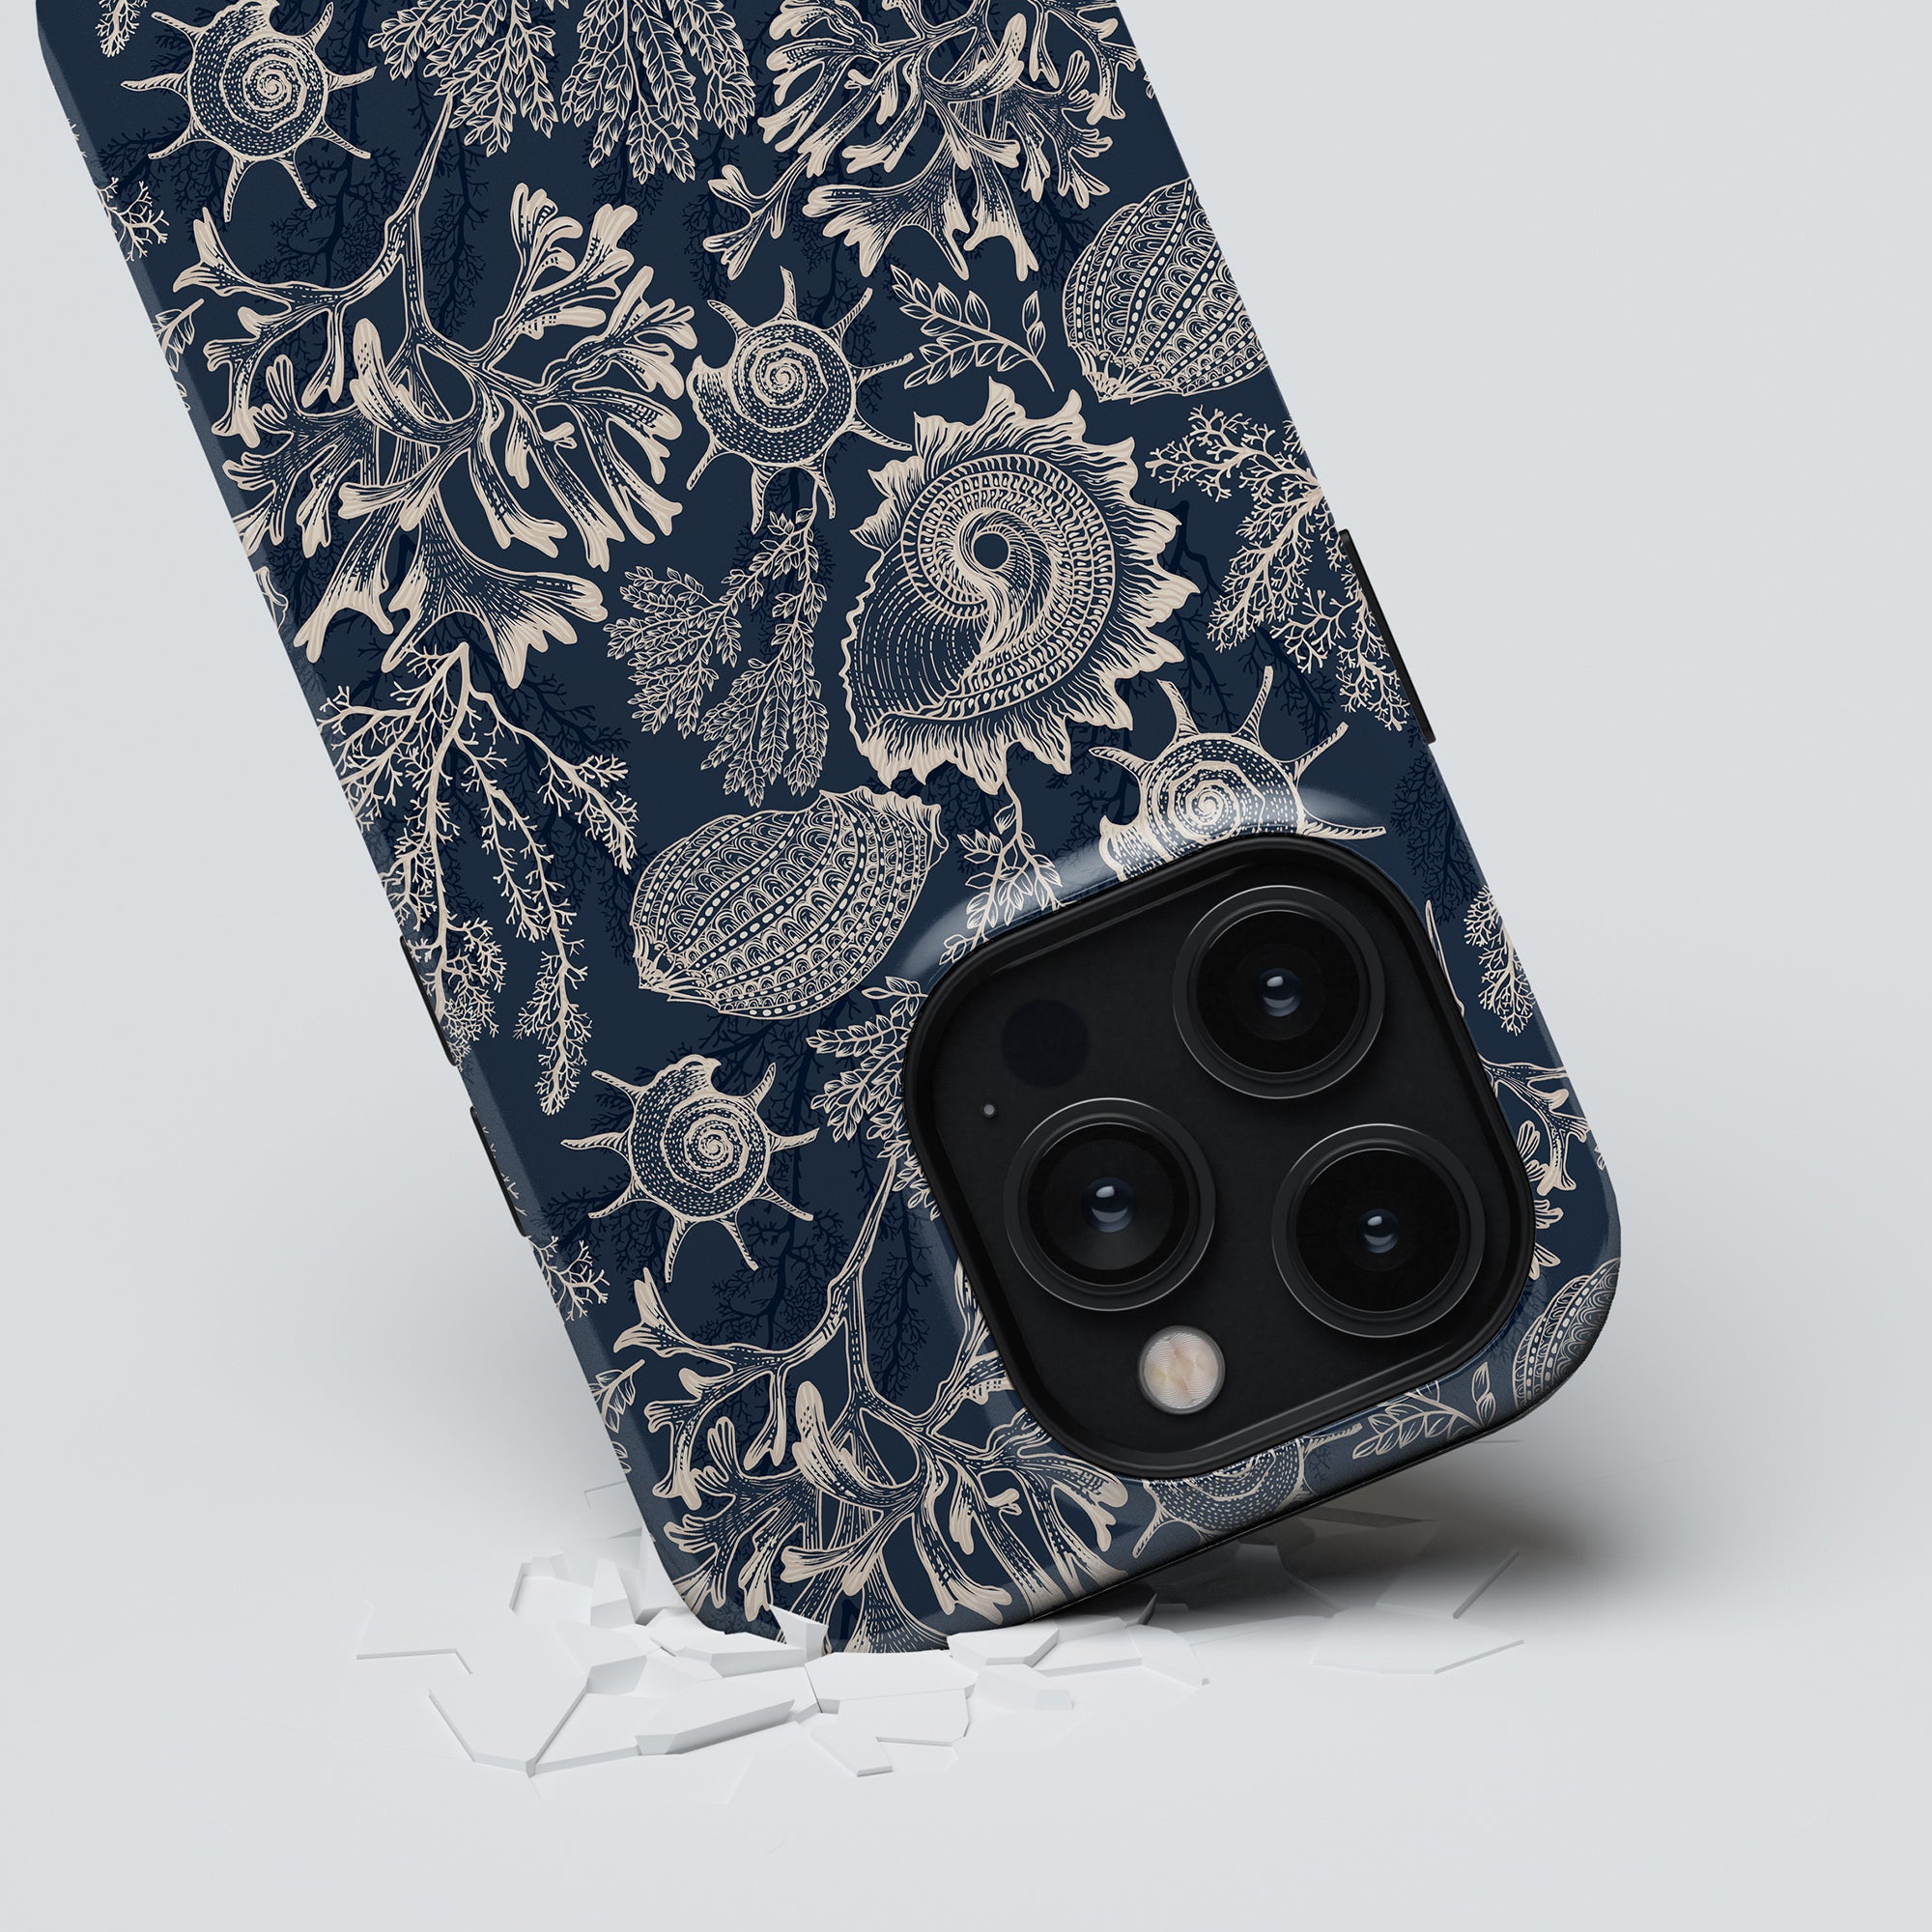 Blue Corals - Tough Case smartphone partially submerged in a white surface, featuring a prominent camera module with three lenses.